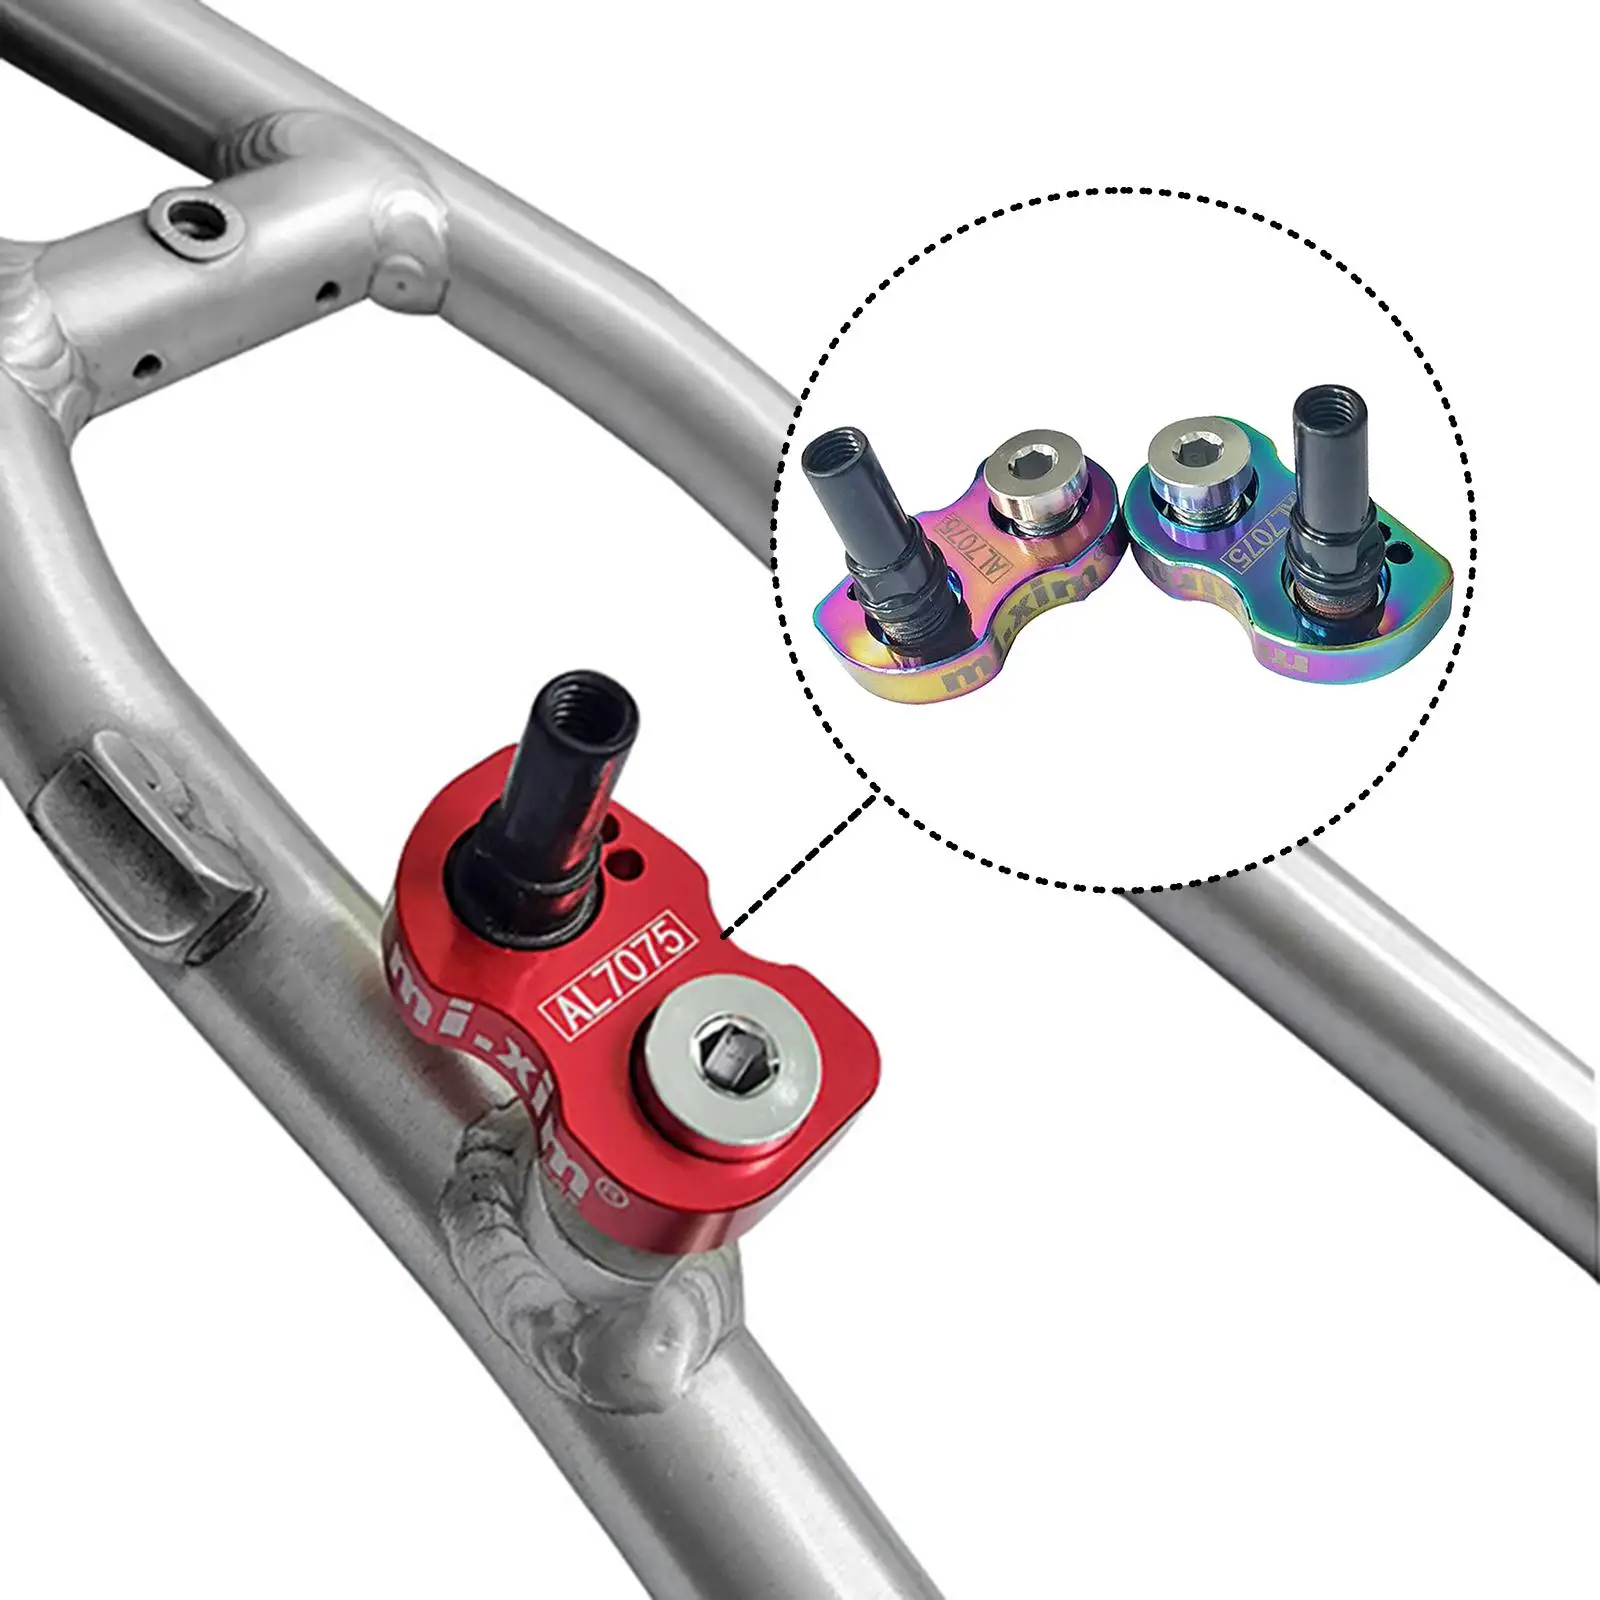 Extension 406 to 451 Seat with Fixed Nuts Converter for Mountain Bike